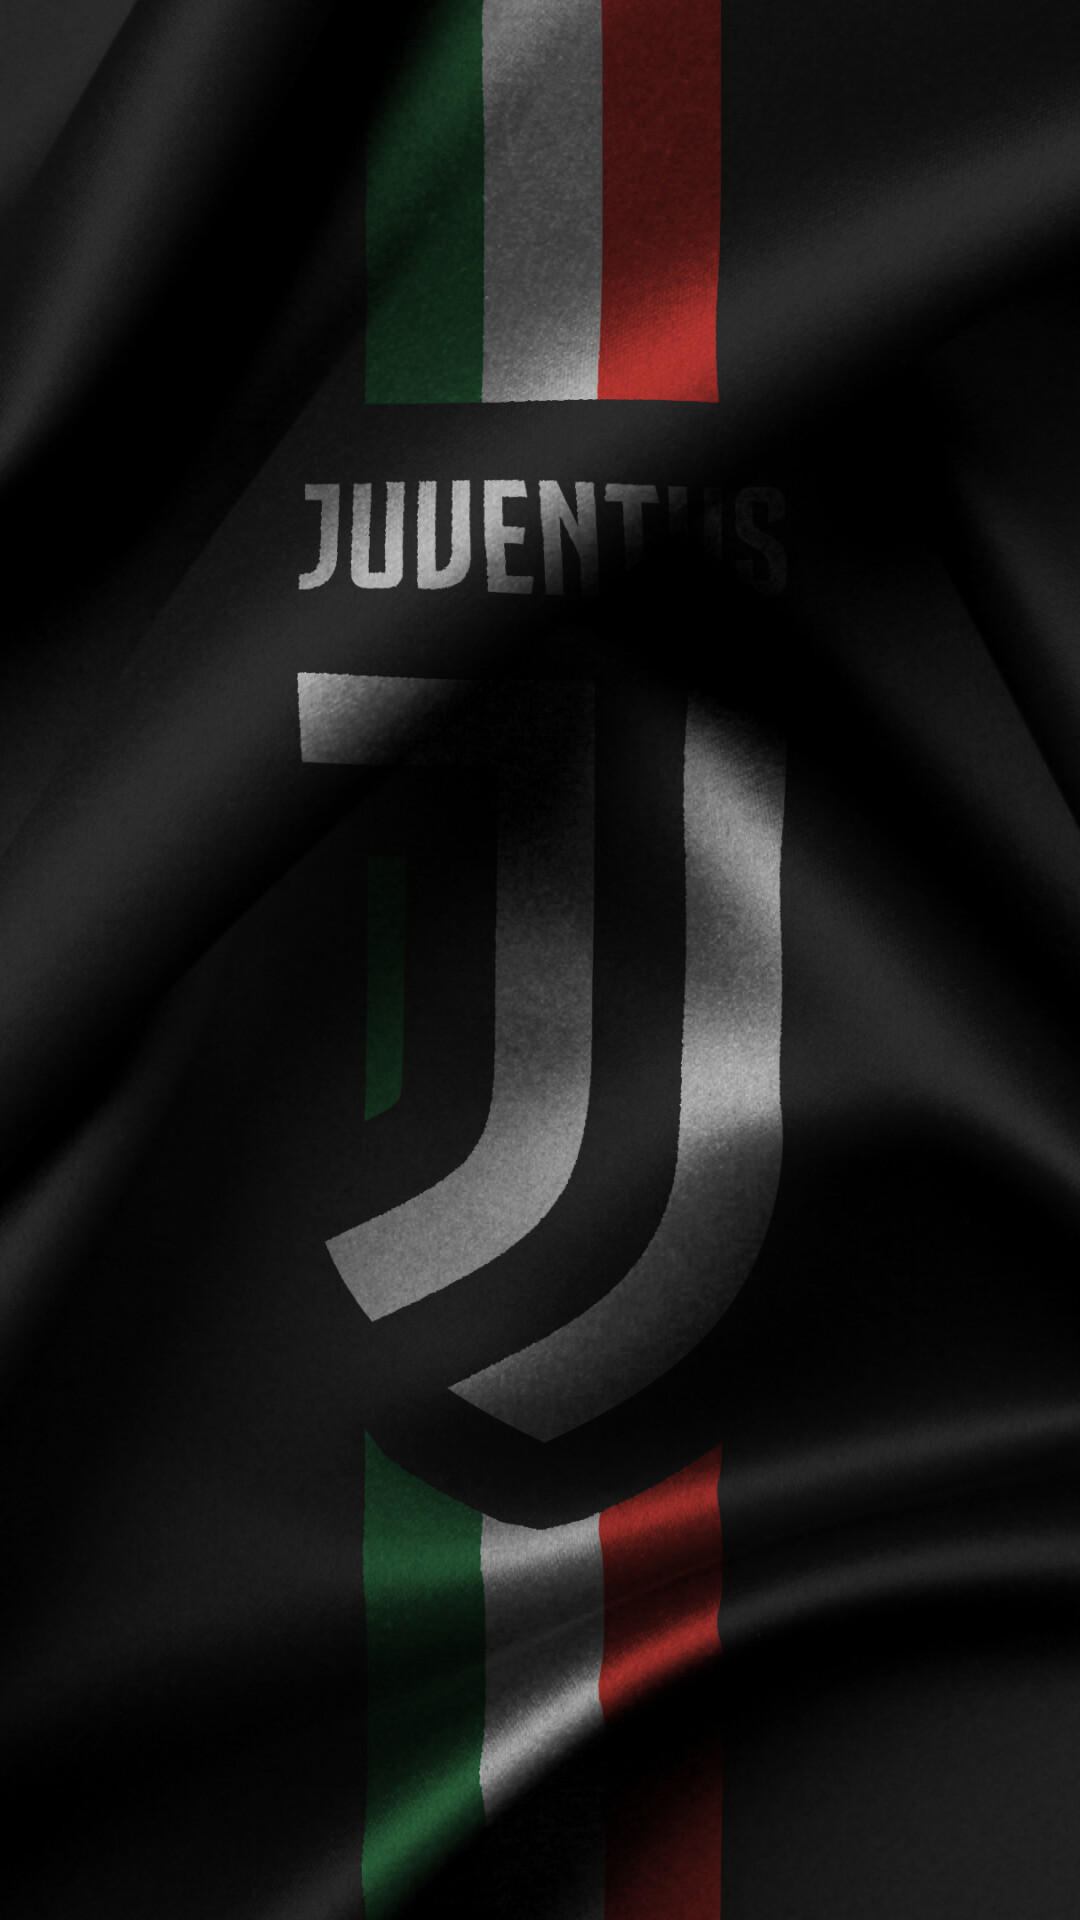 Forza Juve, Juventus passion, Football excellence, Unwavering support, 1080x1920 Full HD Phone